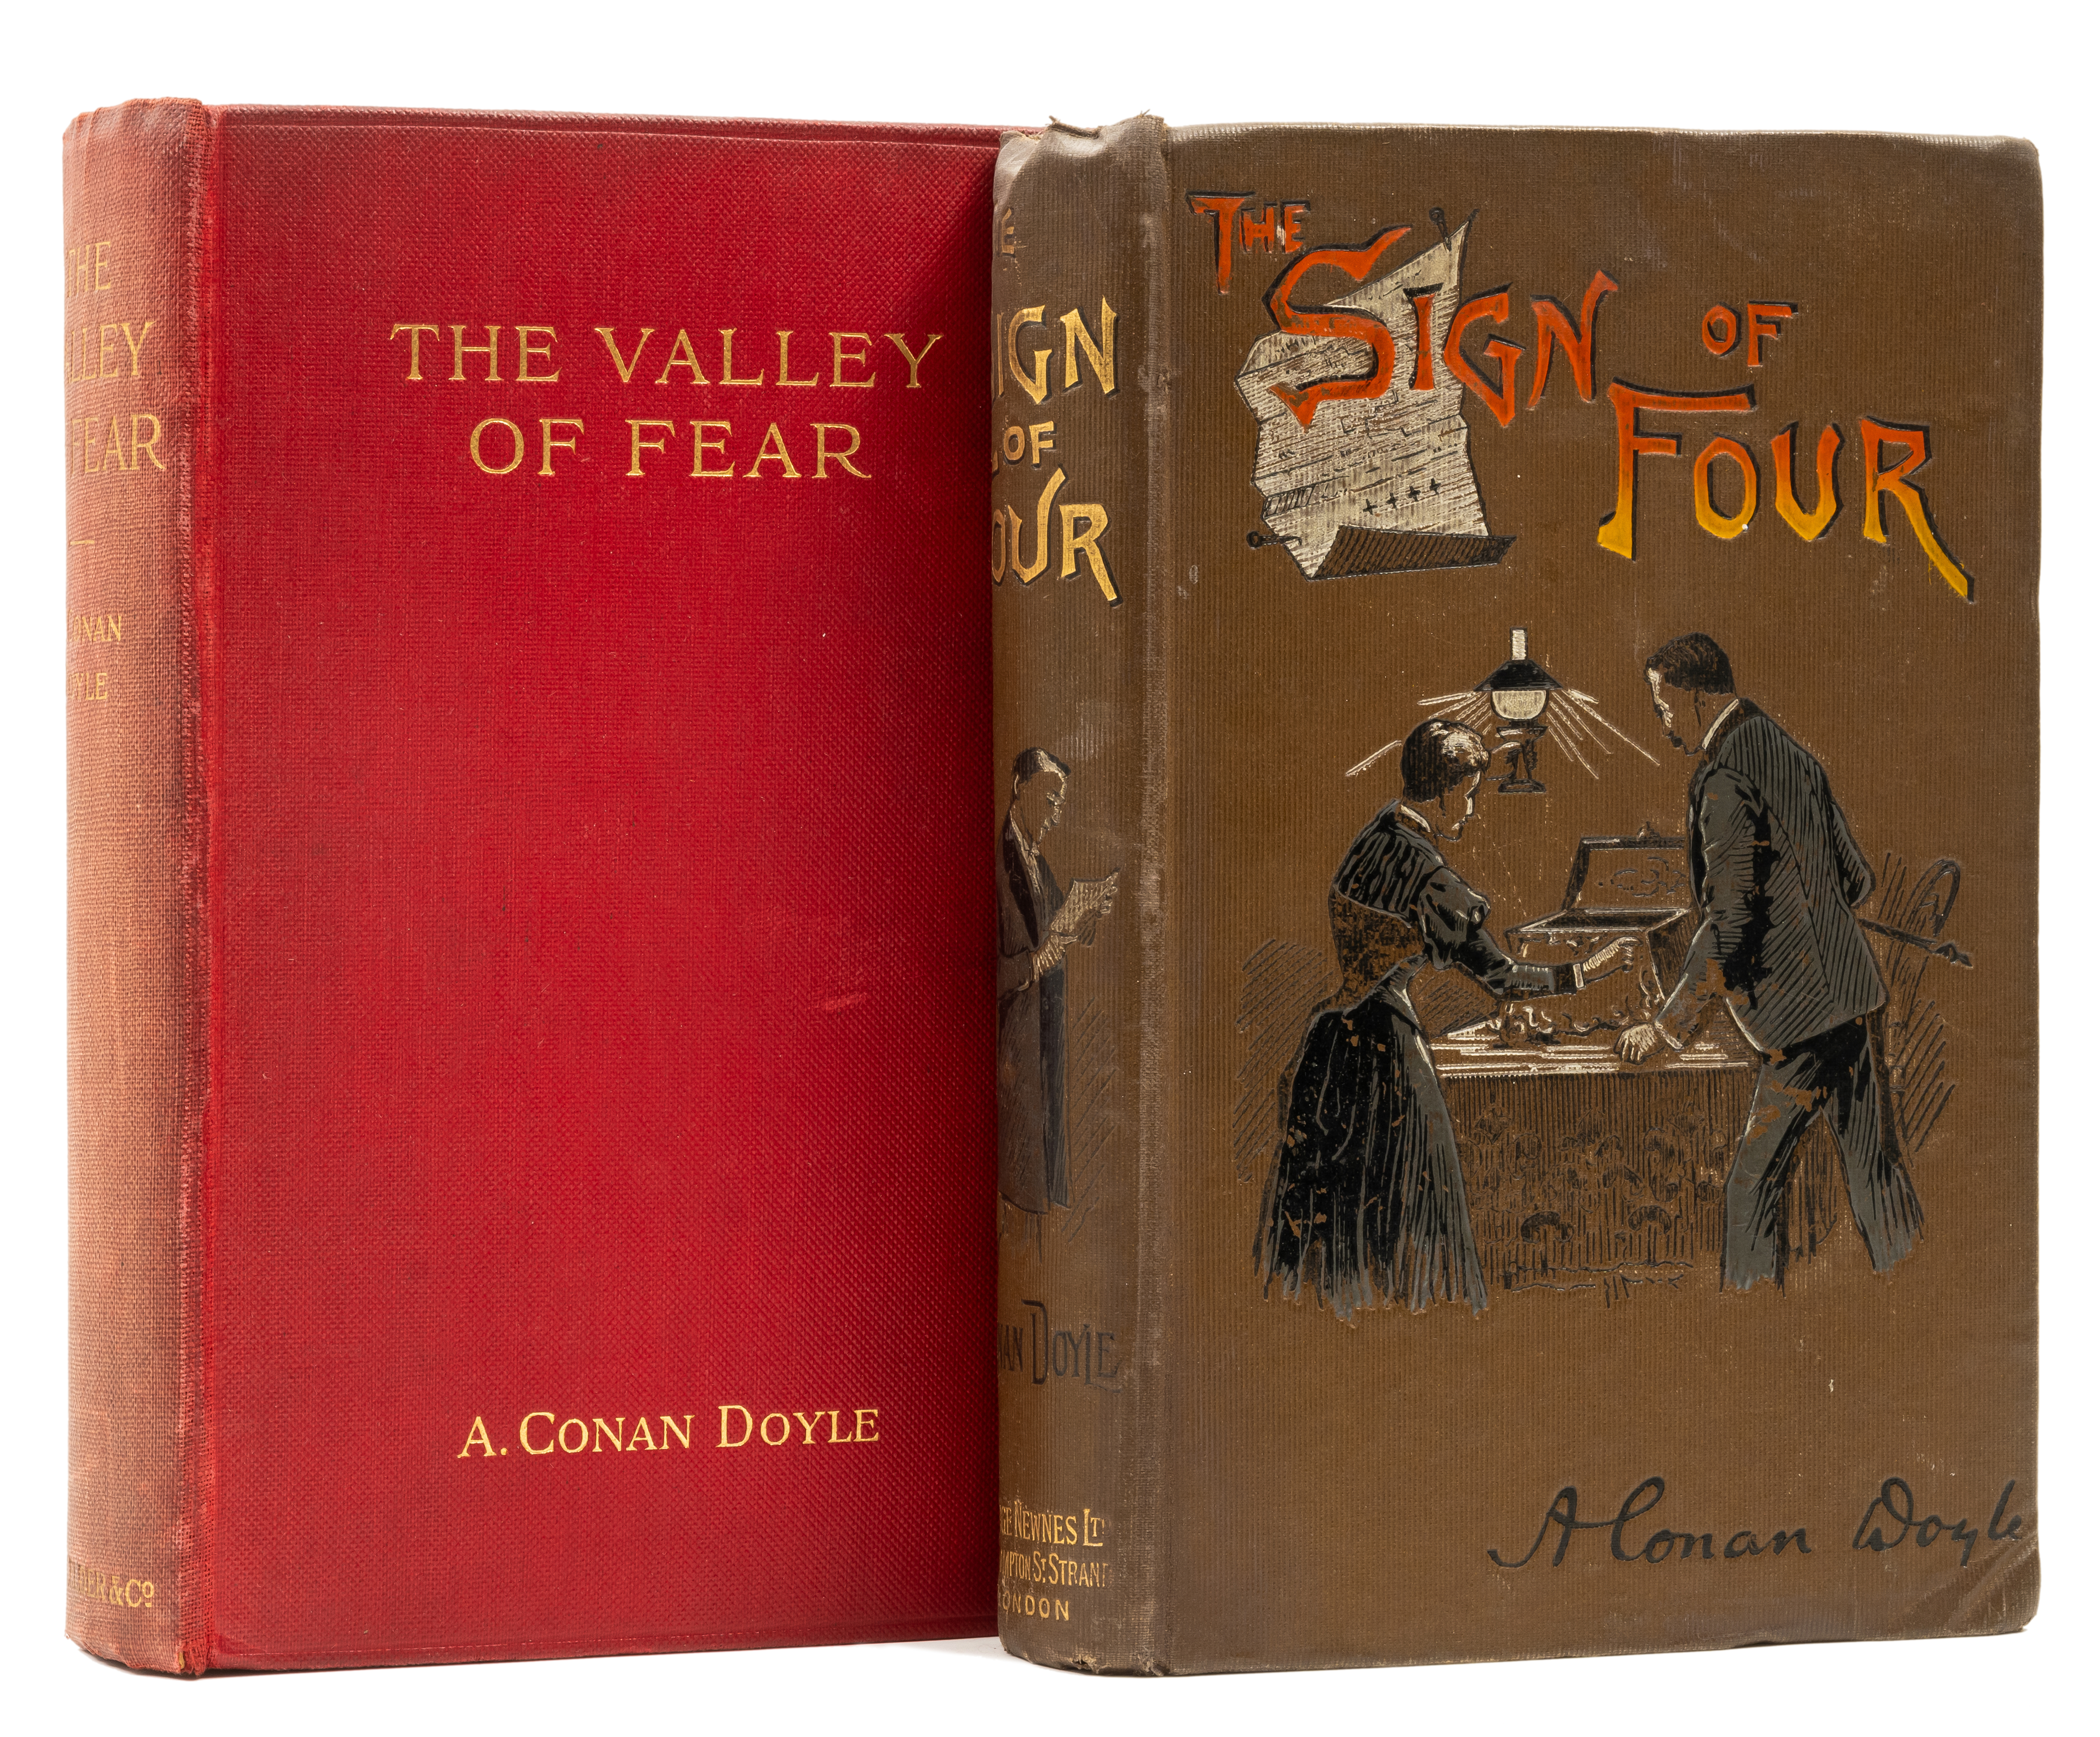 Doyle (Sir Arthur Conan) The Sign of Four, second edition, 1892; and a first edition of The Valle...